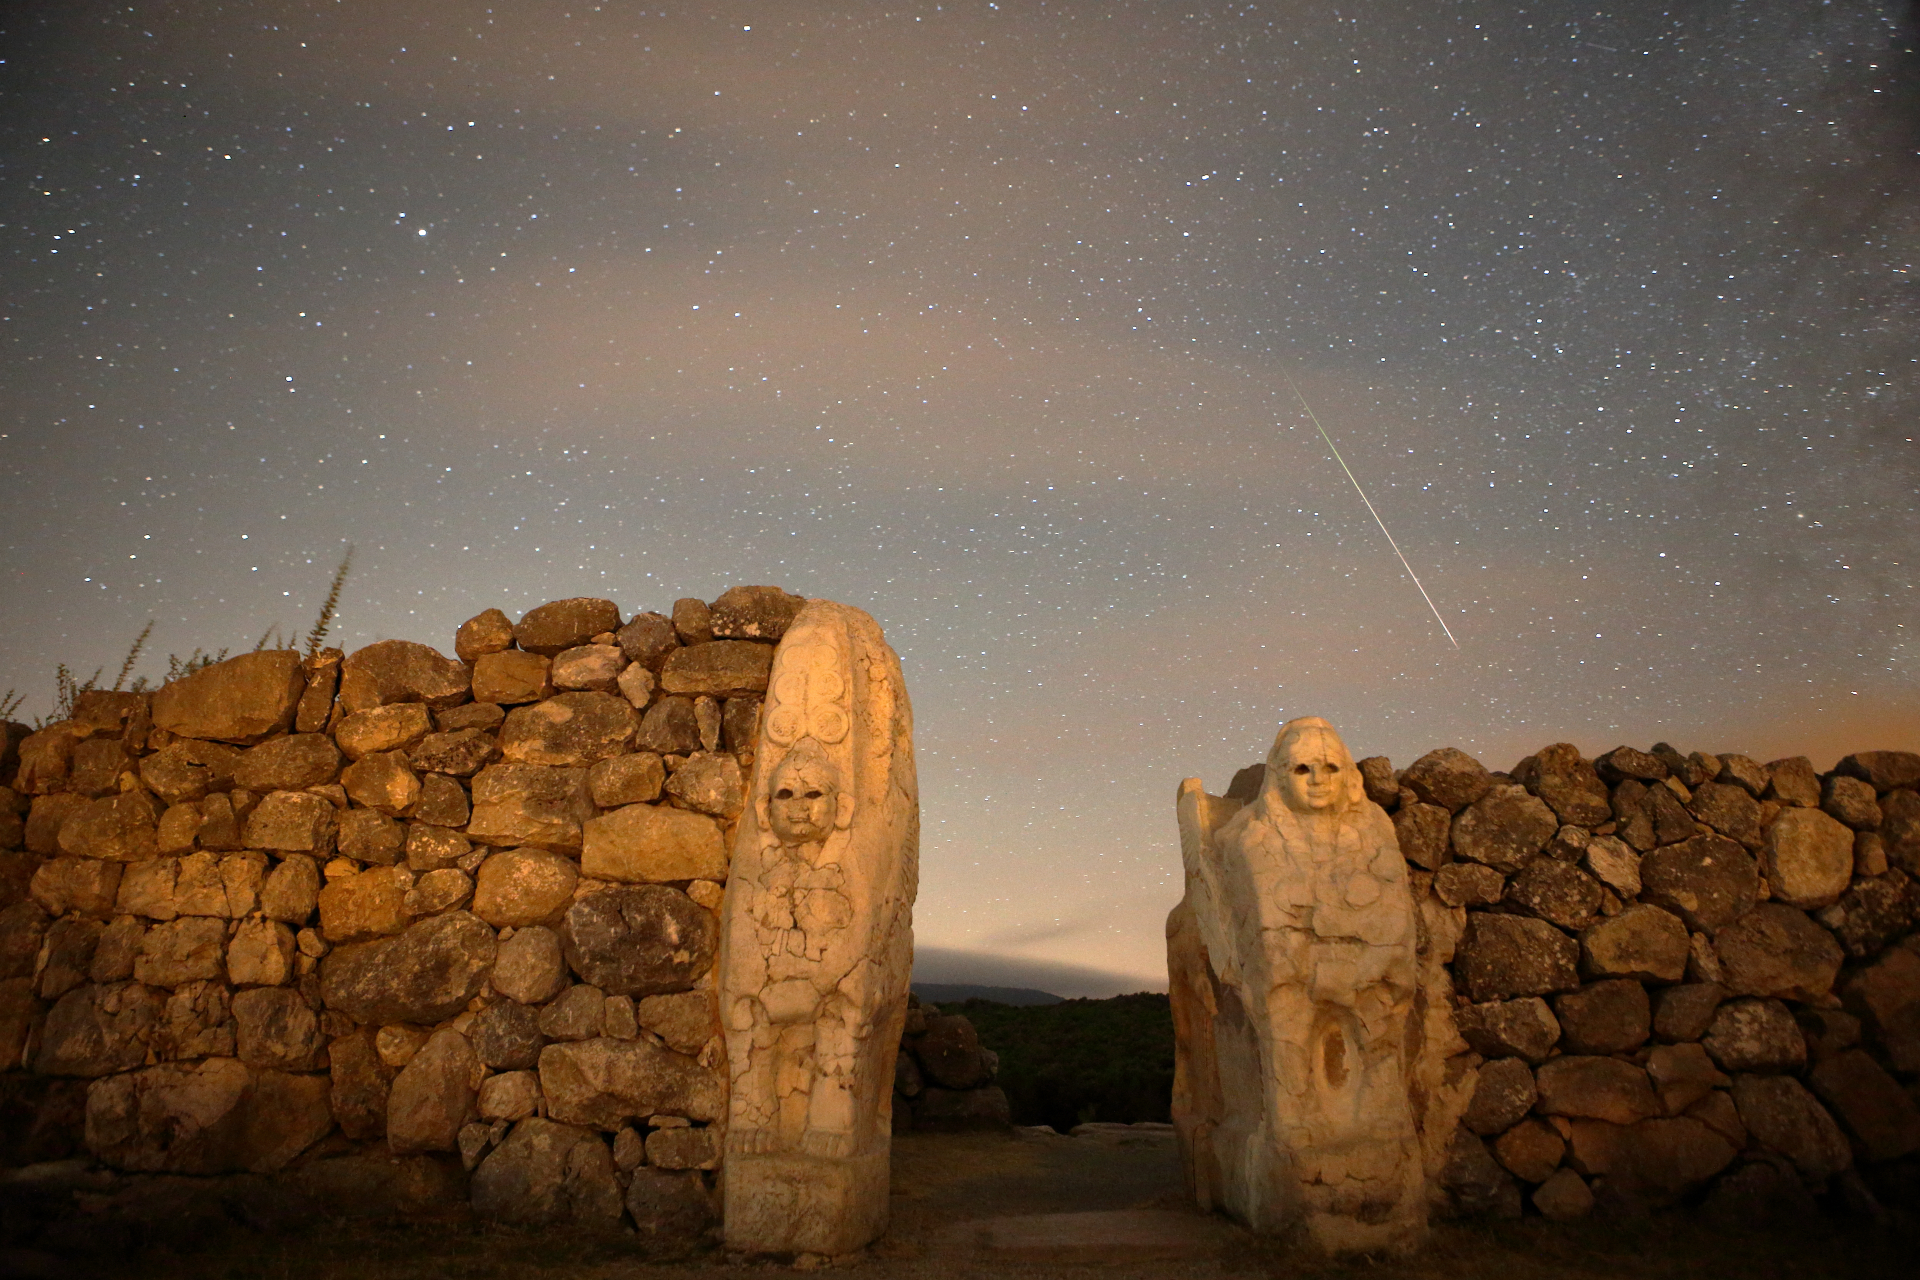 A meteor streak prominent in the sky above a stone wall with two figures carved into the rock.